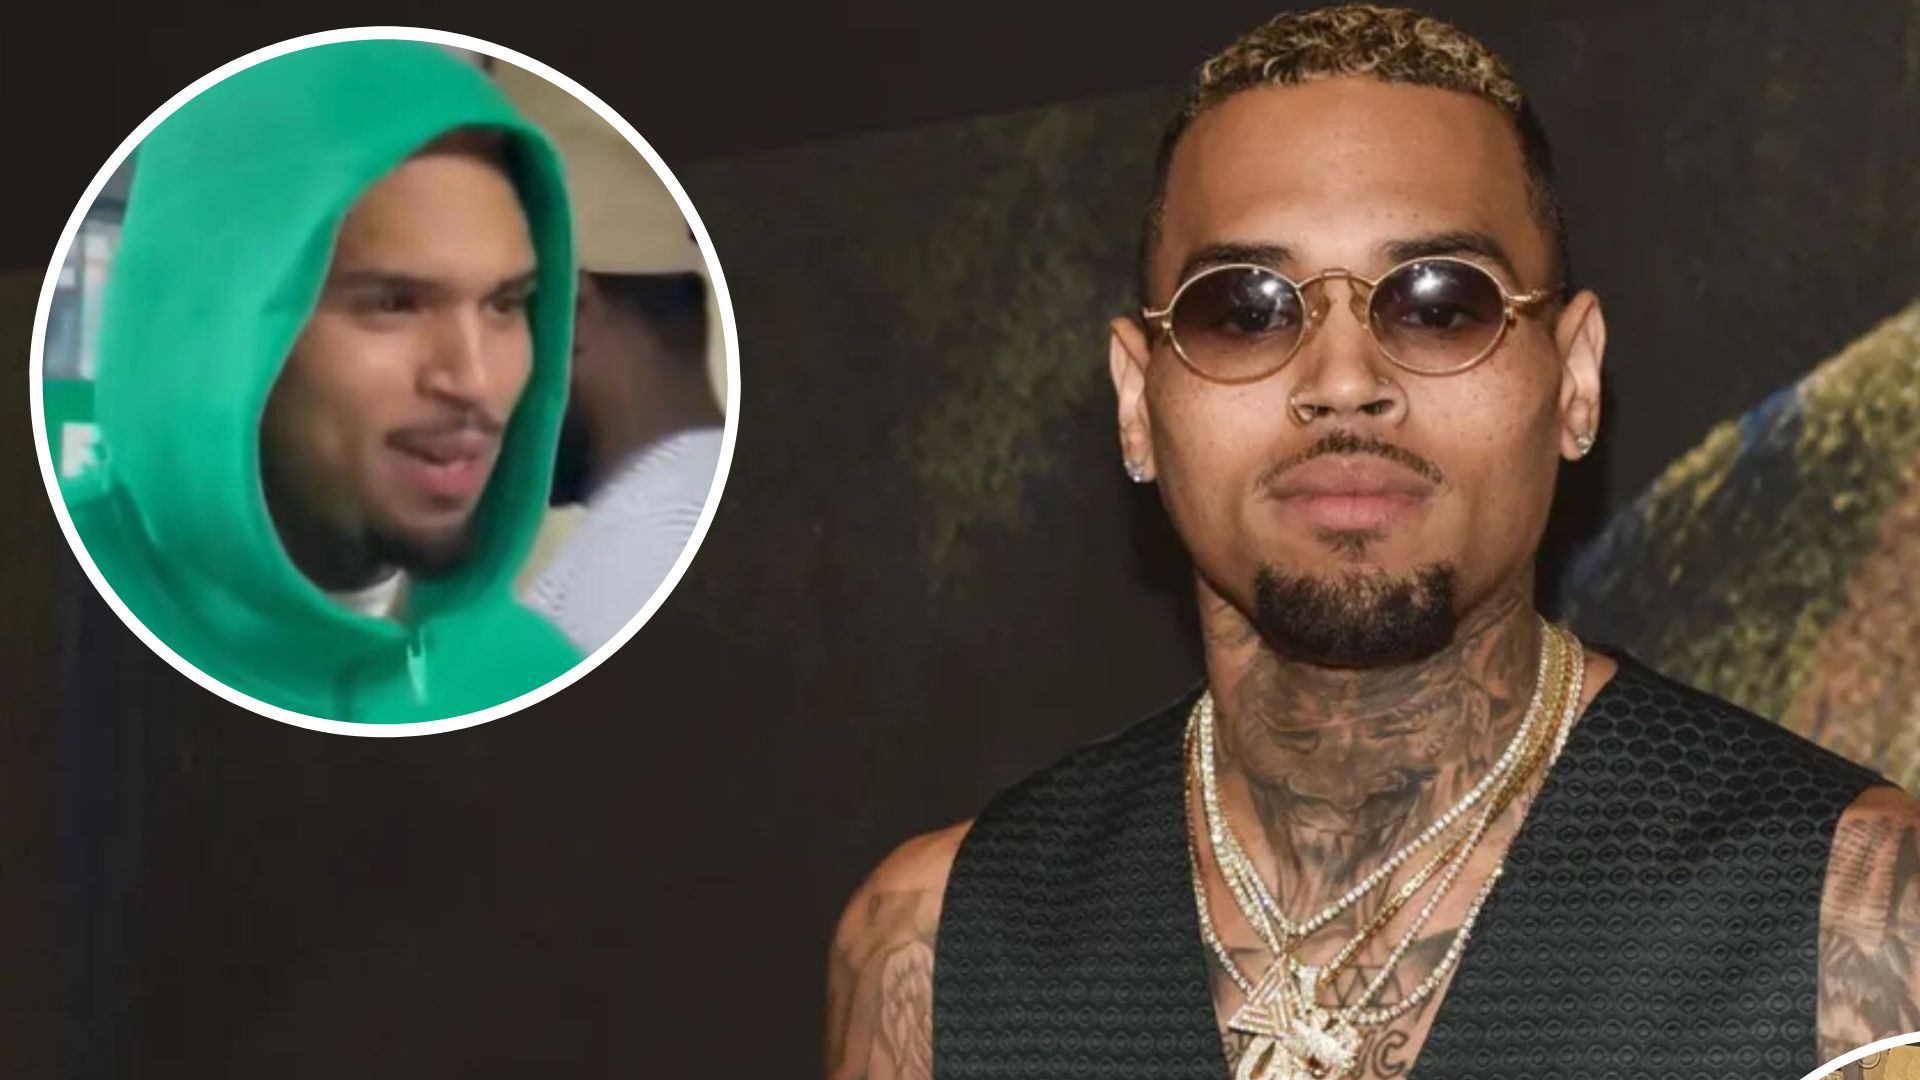 Chris Brown Arrives In Jamaica For His Highly Anticipated Show - Watch Videos